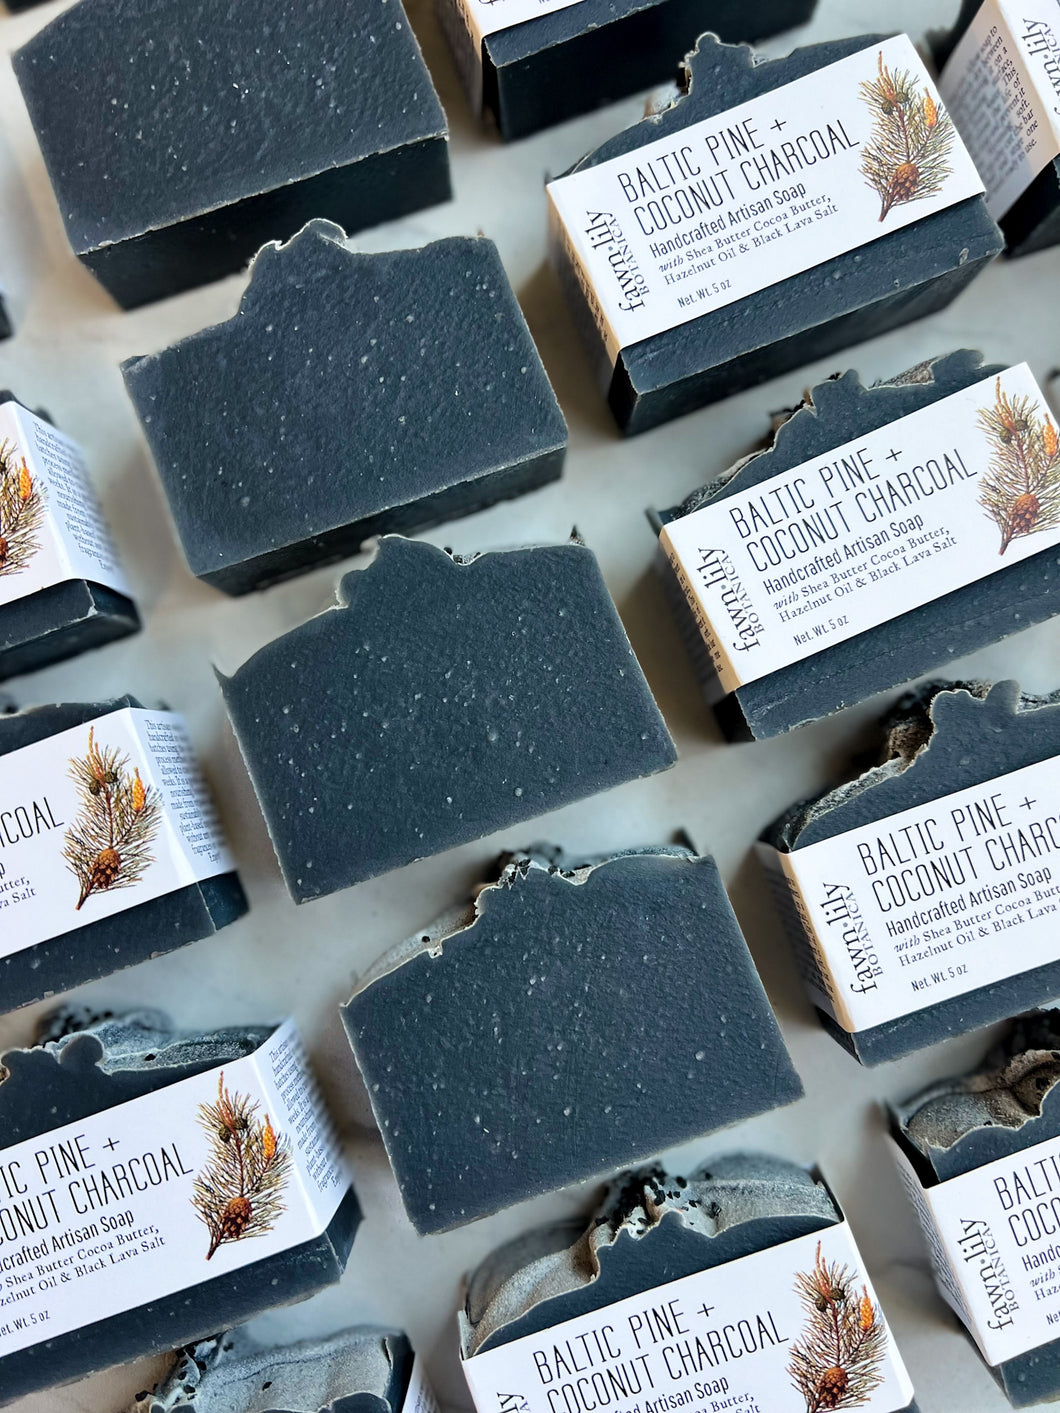 BALTIC PINE + COCONUT CHARCOAL ARTISAN SOAP - LIMITED EDITION!